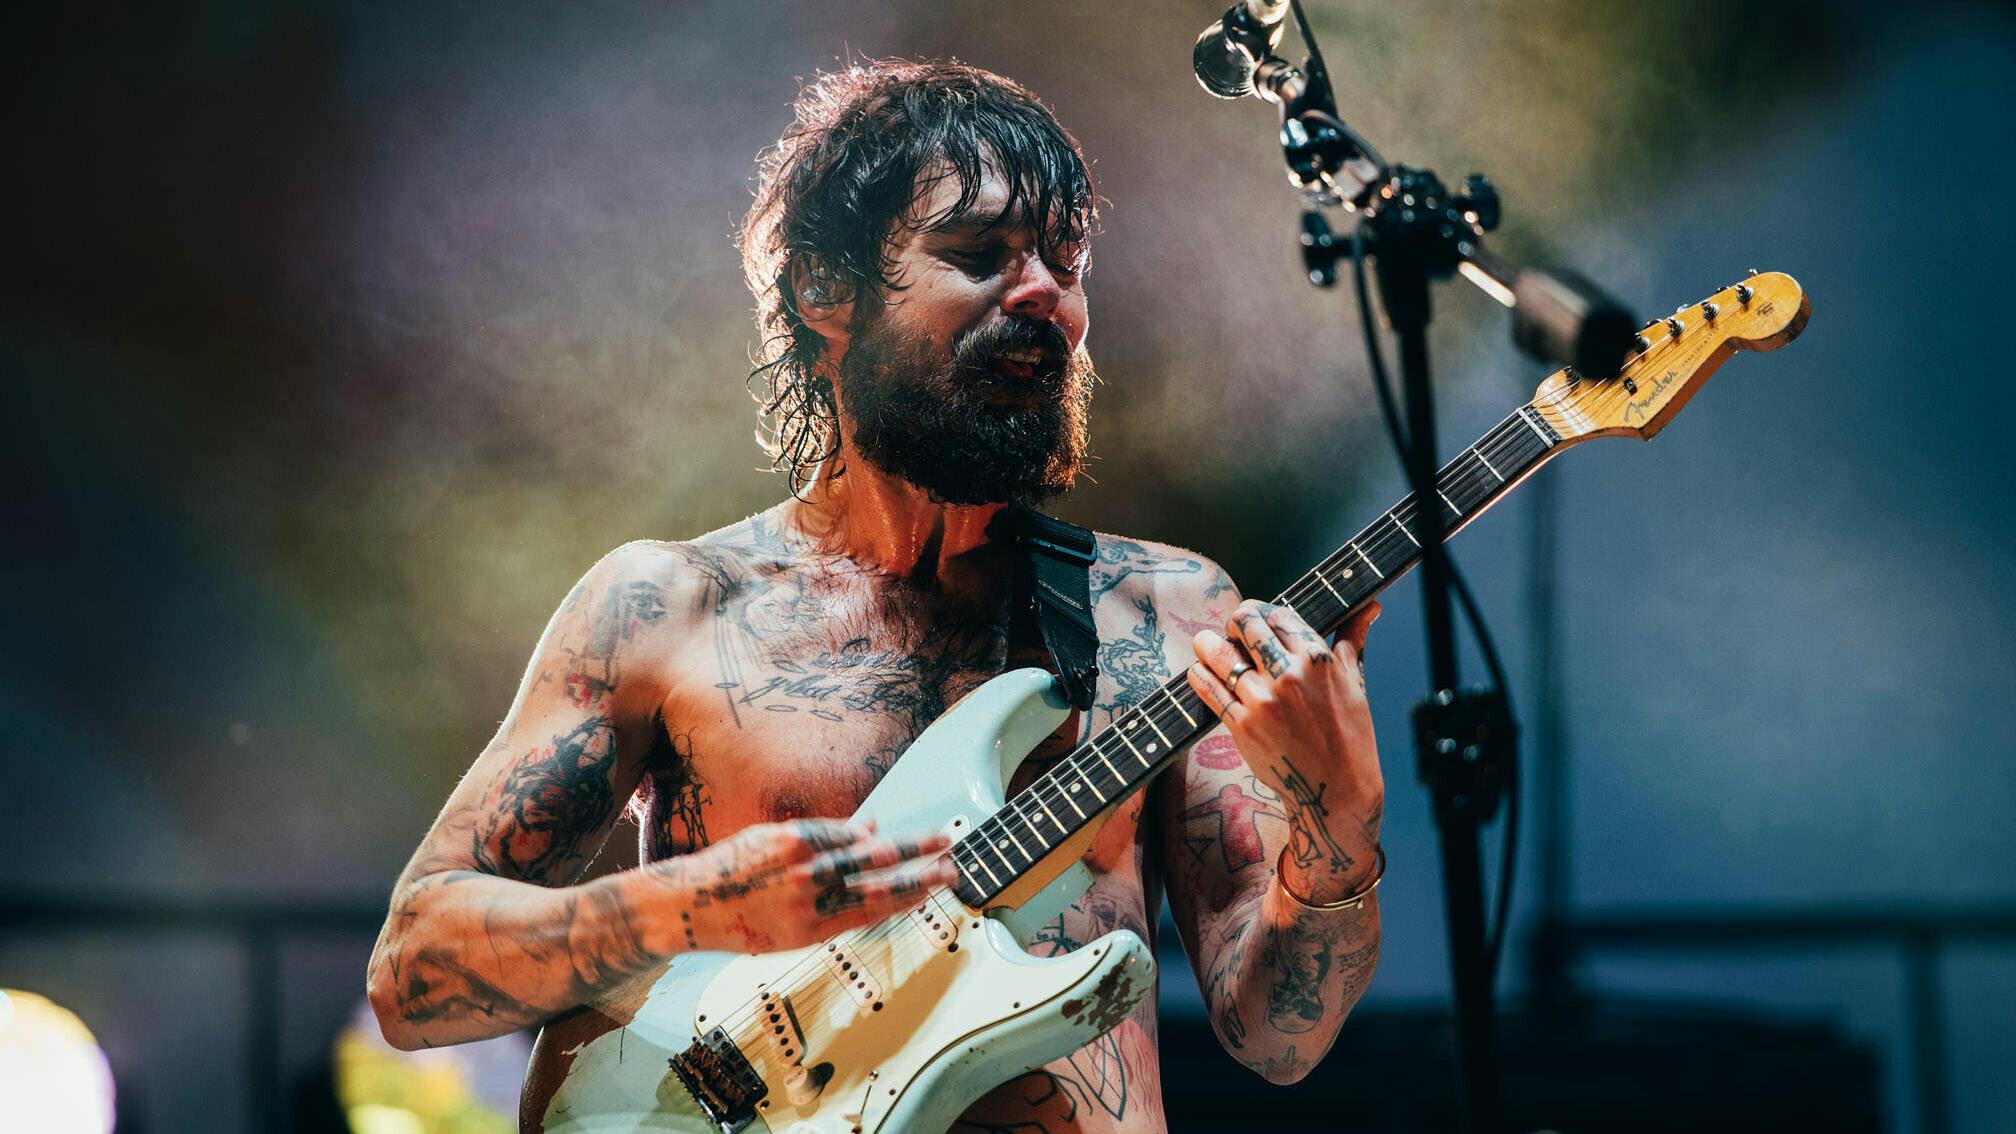 Biffy Clyro announce surprise new project, The Myth Of The Happily Ever After